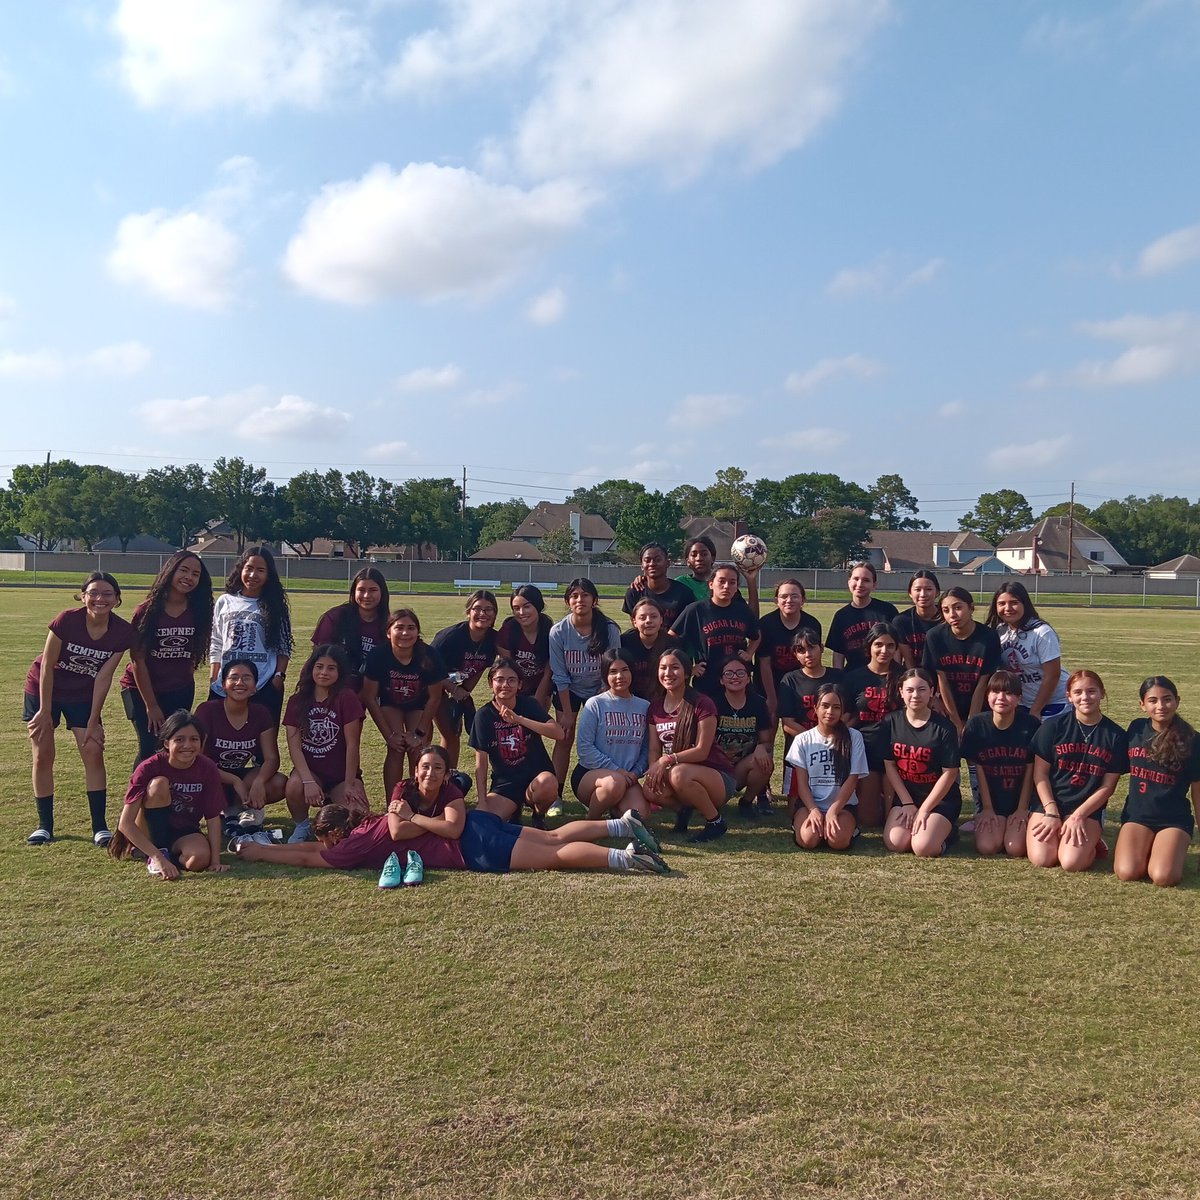 So fun to get to run the SLMS practice with almost 20 of our kempner soccer girls.